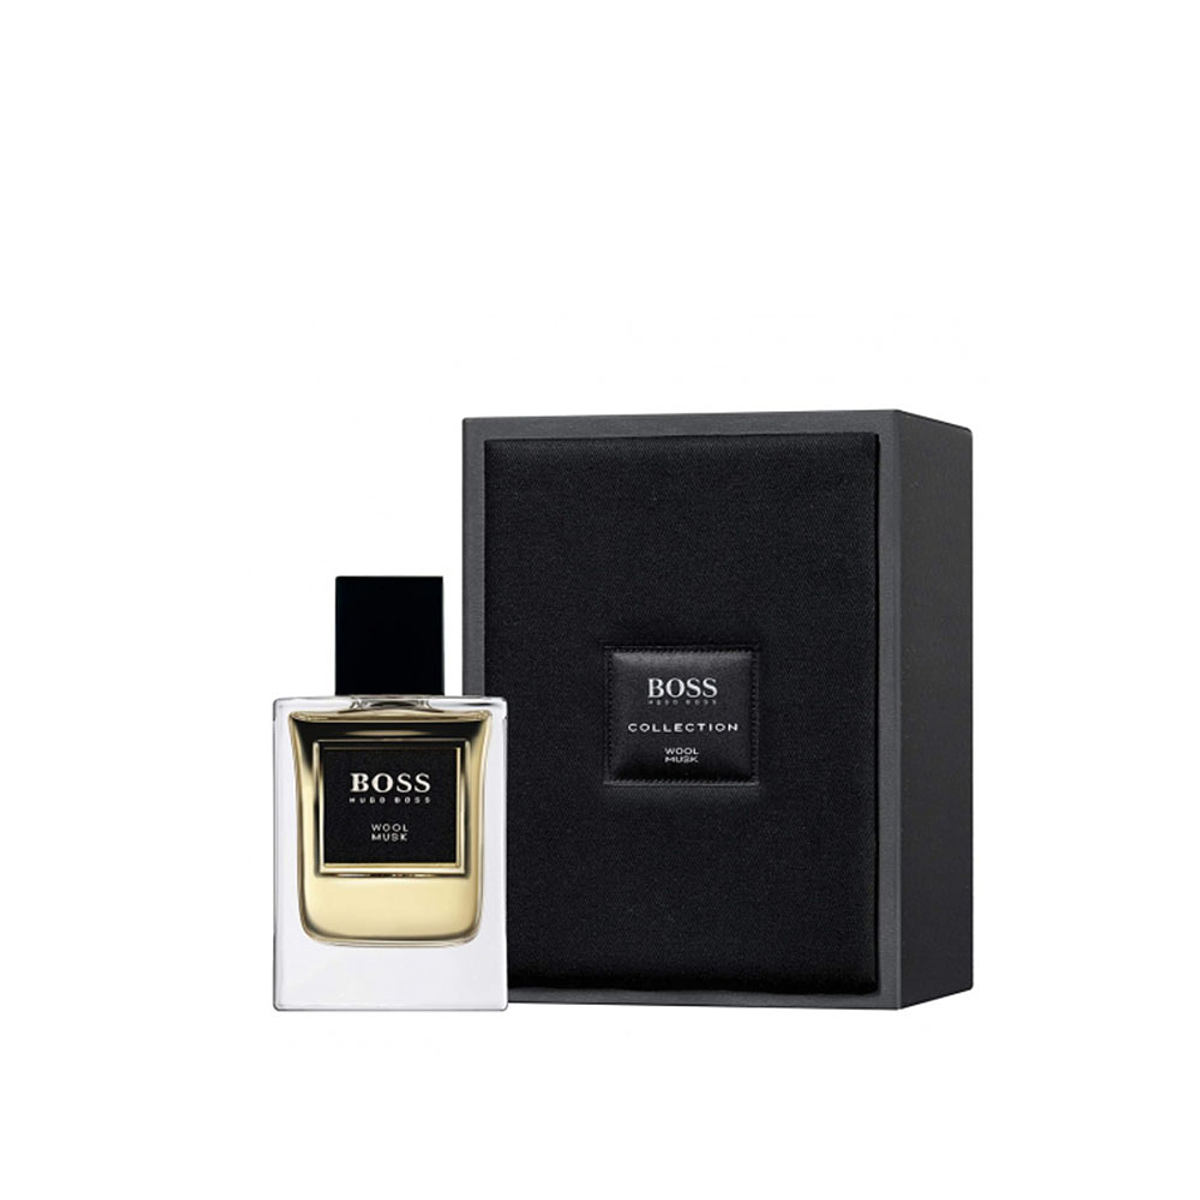 PERFUME BOSS COLLECTION WOOL & MUSK HOMBRE EDT 50 ML